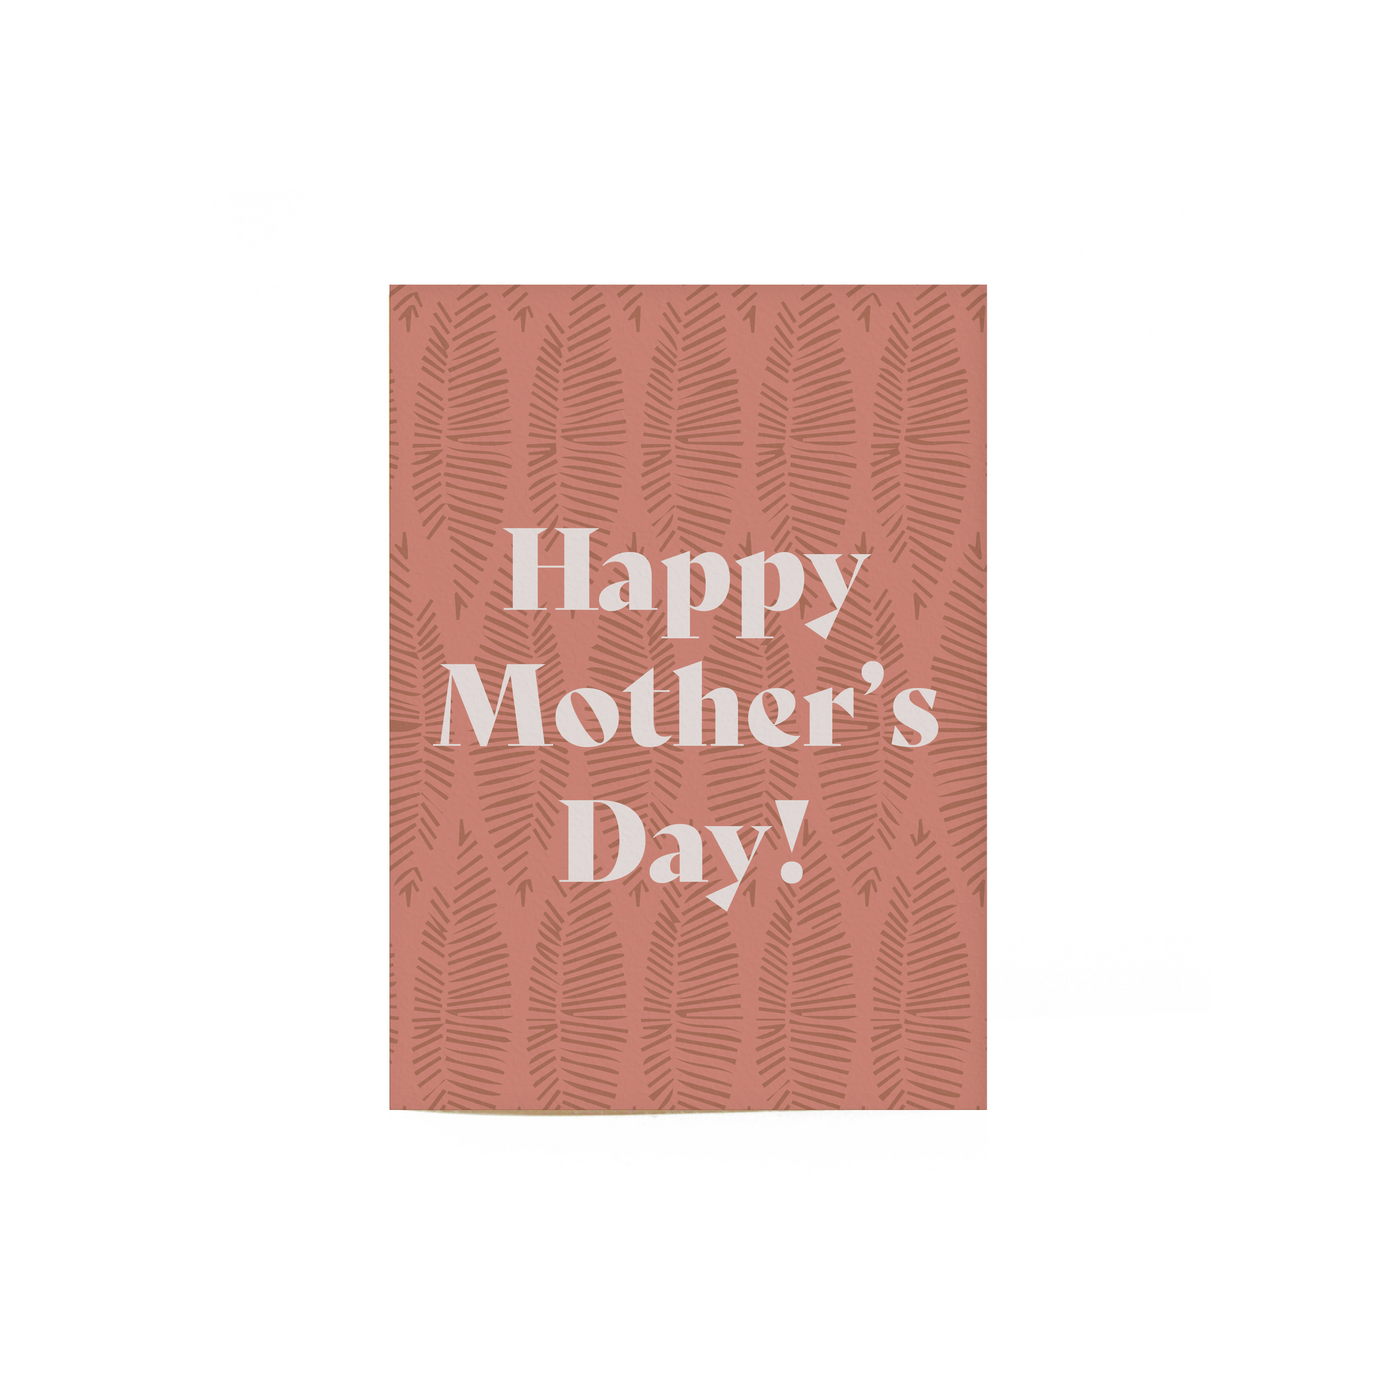 pink Happy Mother's day card that reads "Happy Mothers day!" that has thin green lined leaf illustrations behind the text